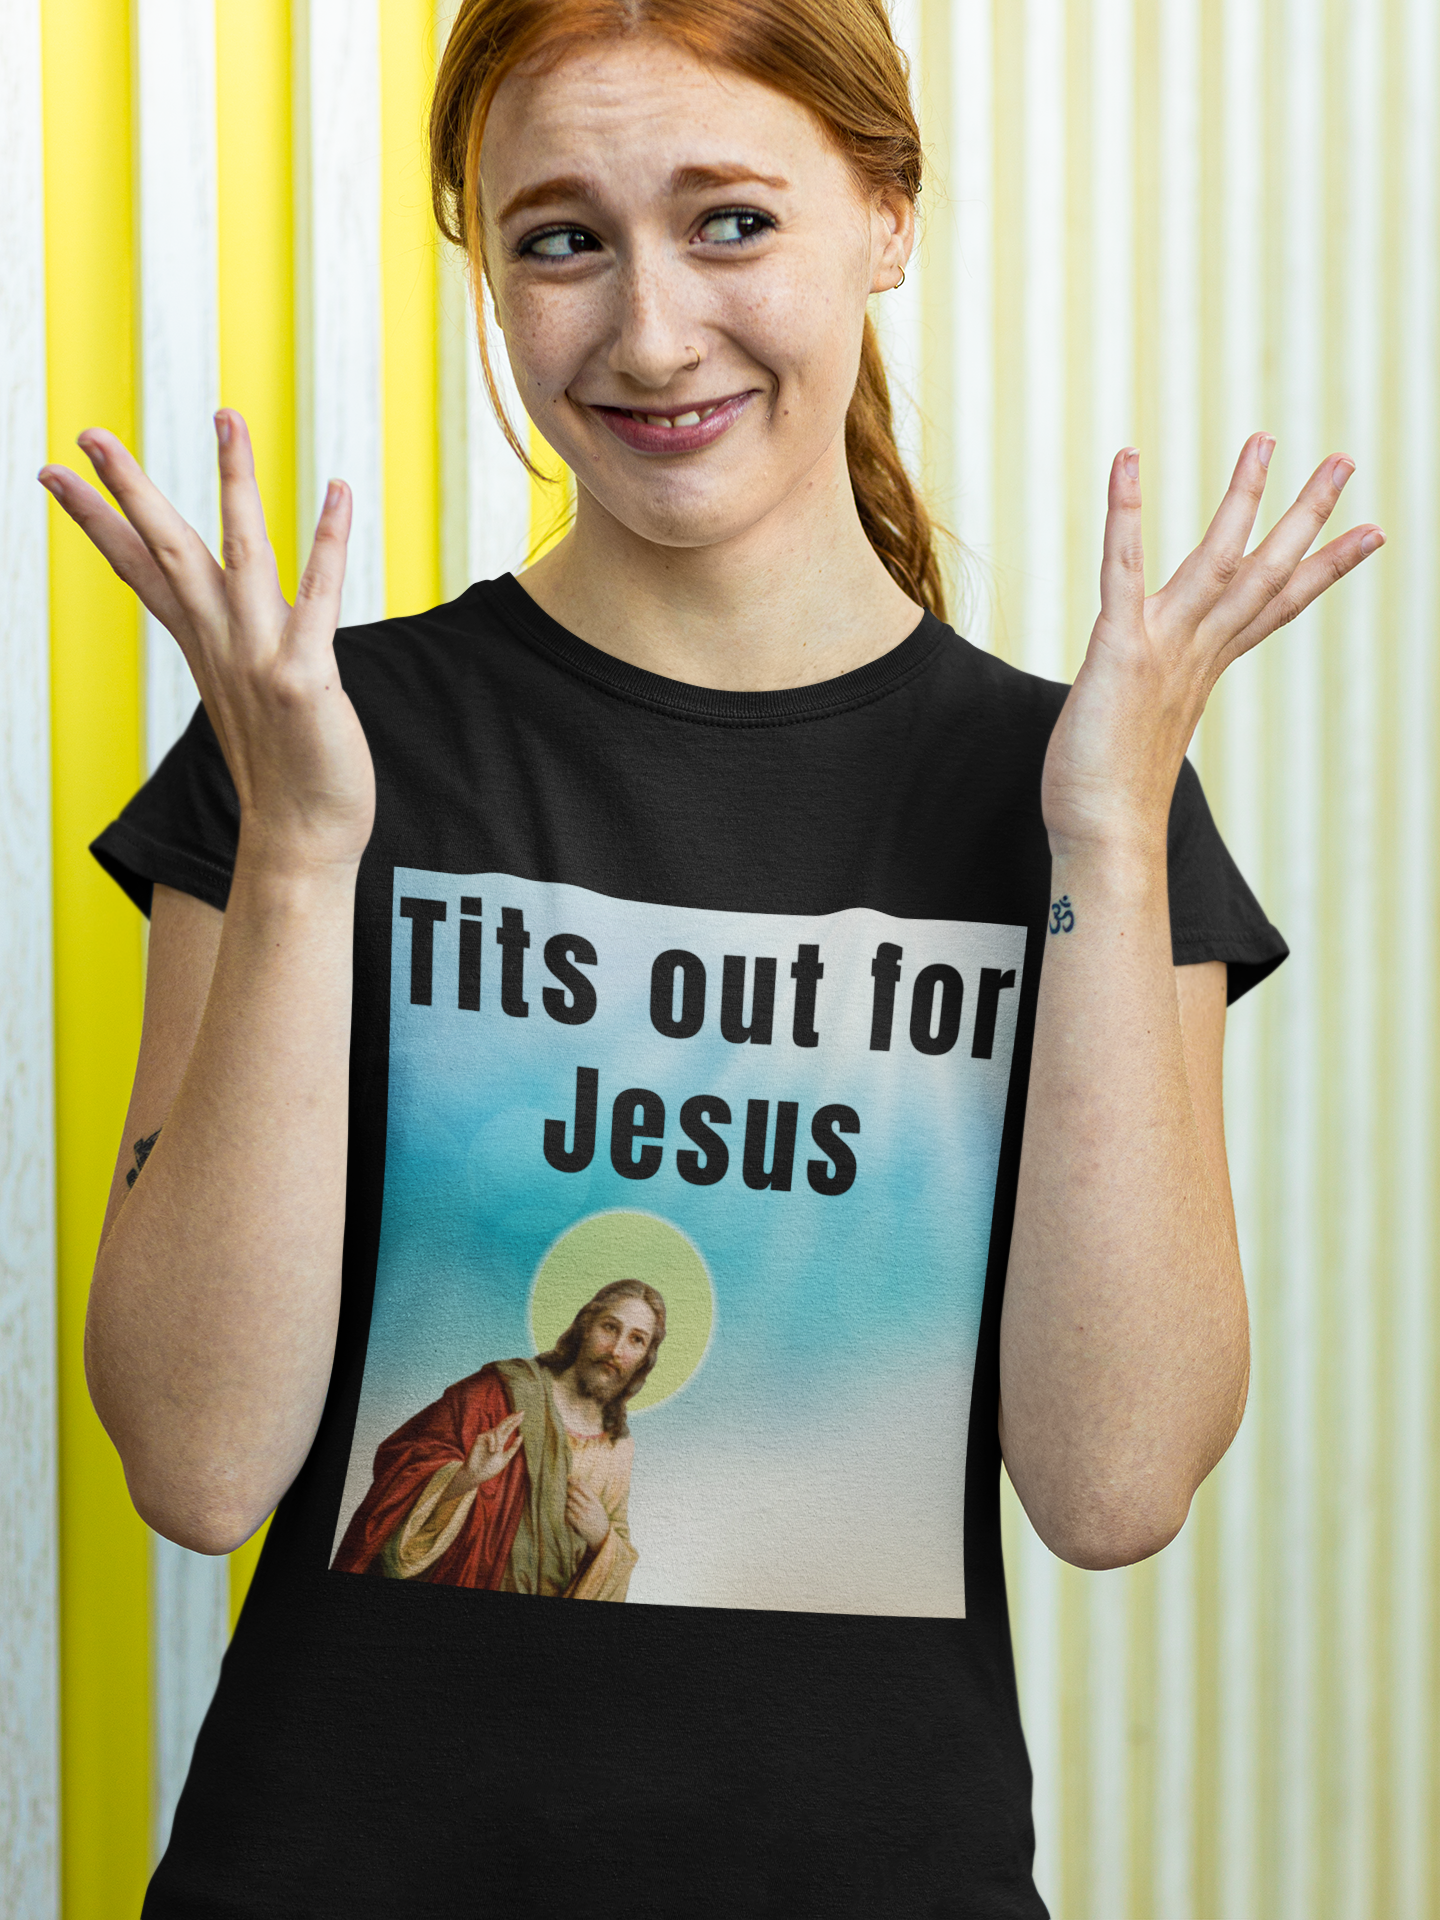 Tits out for Jesus - Unisex T-Shirt Christmas gift dads day gift gift for dad gift for grandpa gift for her gift for him gift for mom gift for sister gift for wife moms gift Unique gift